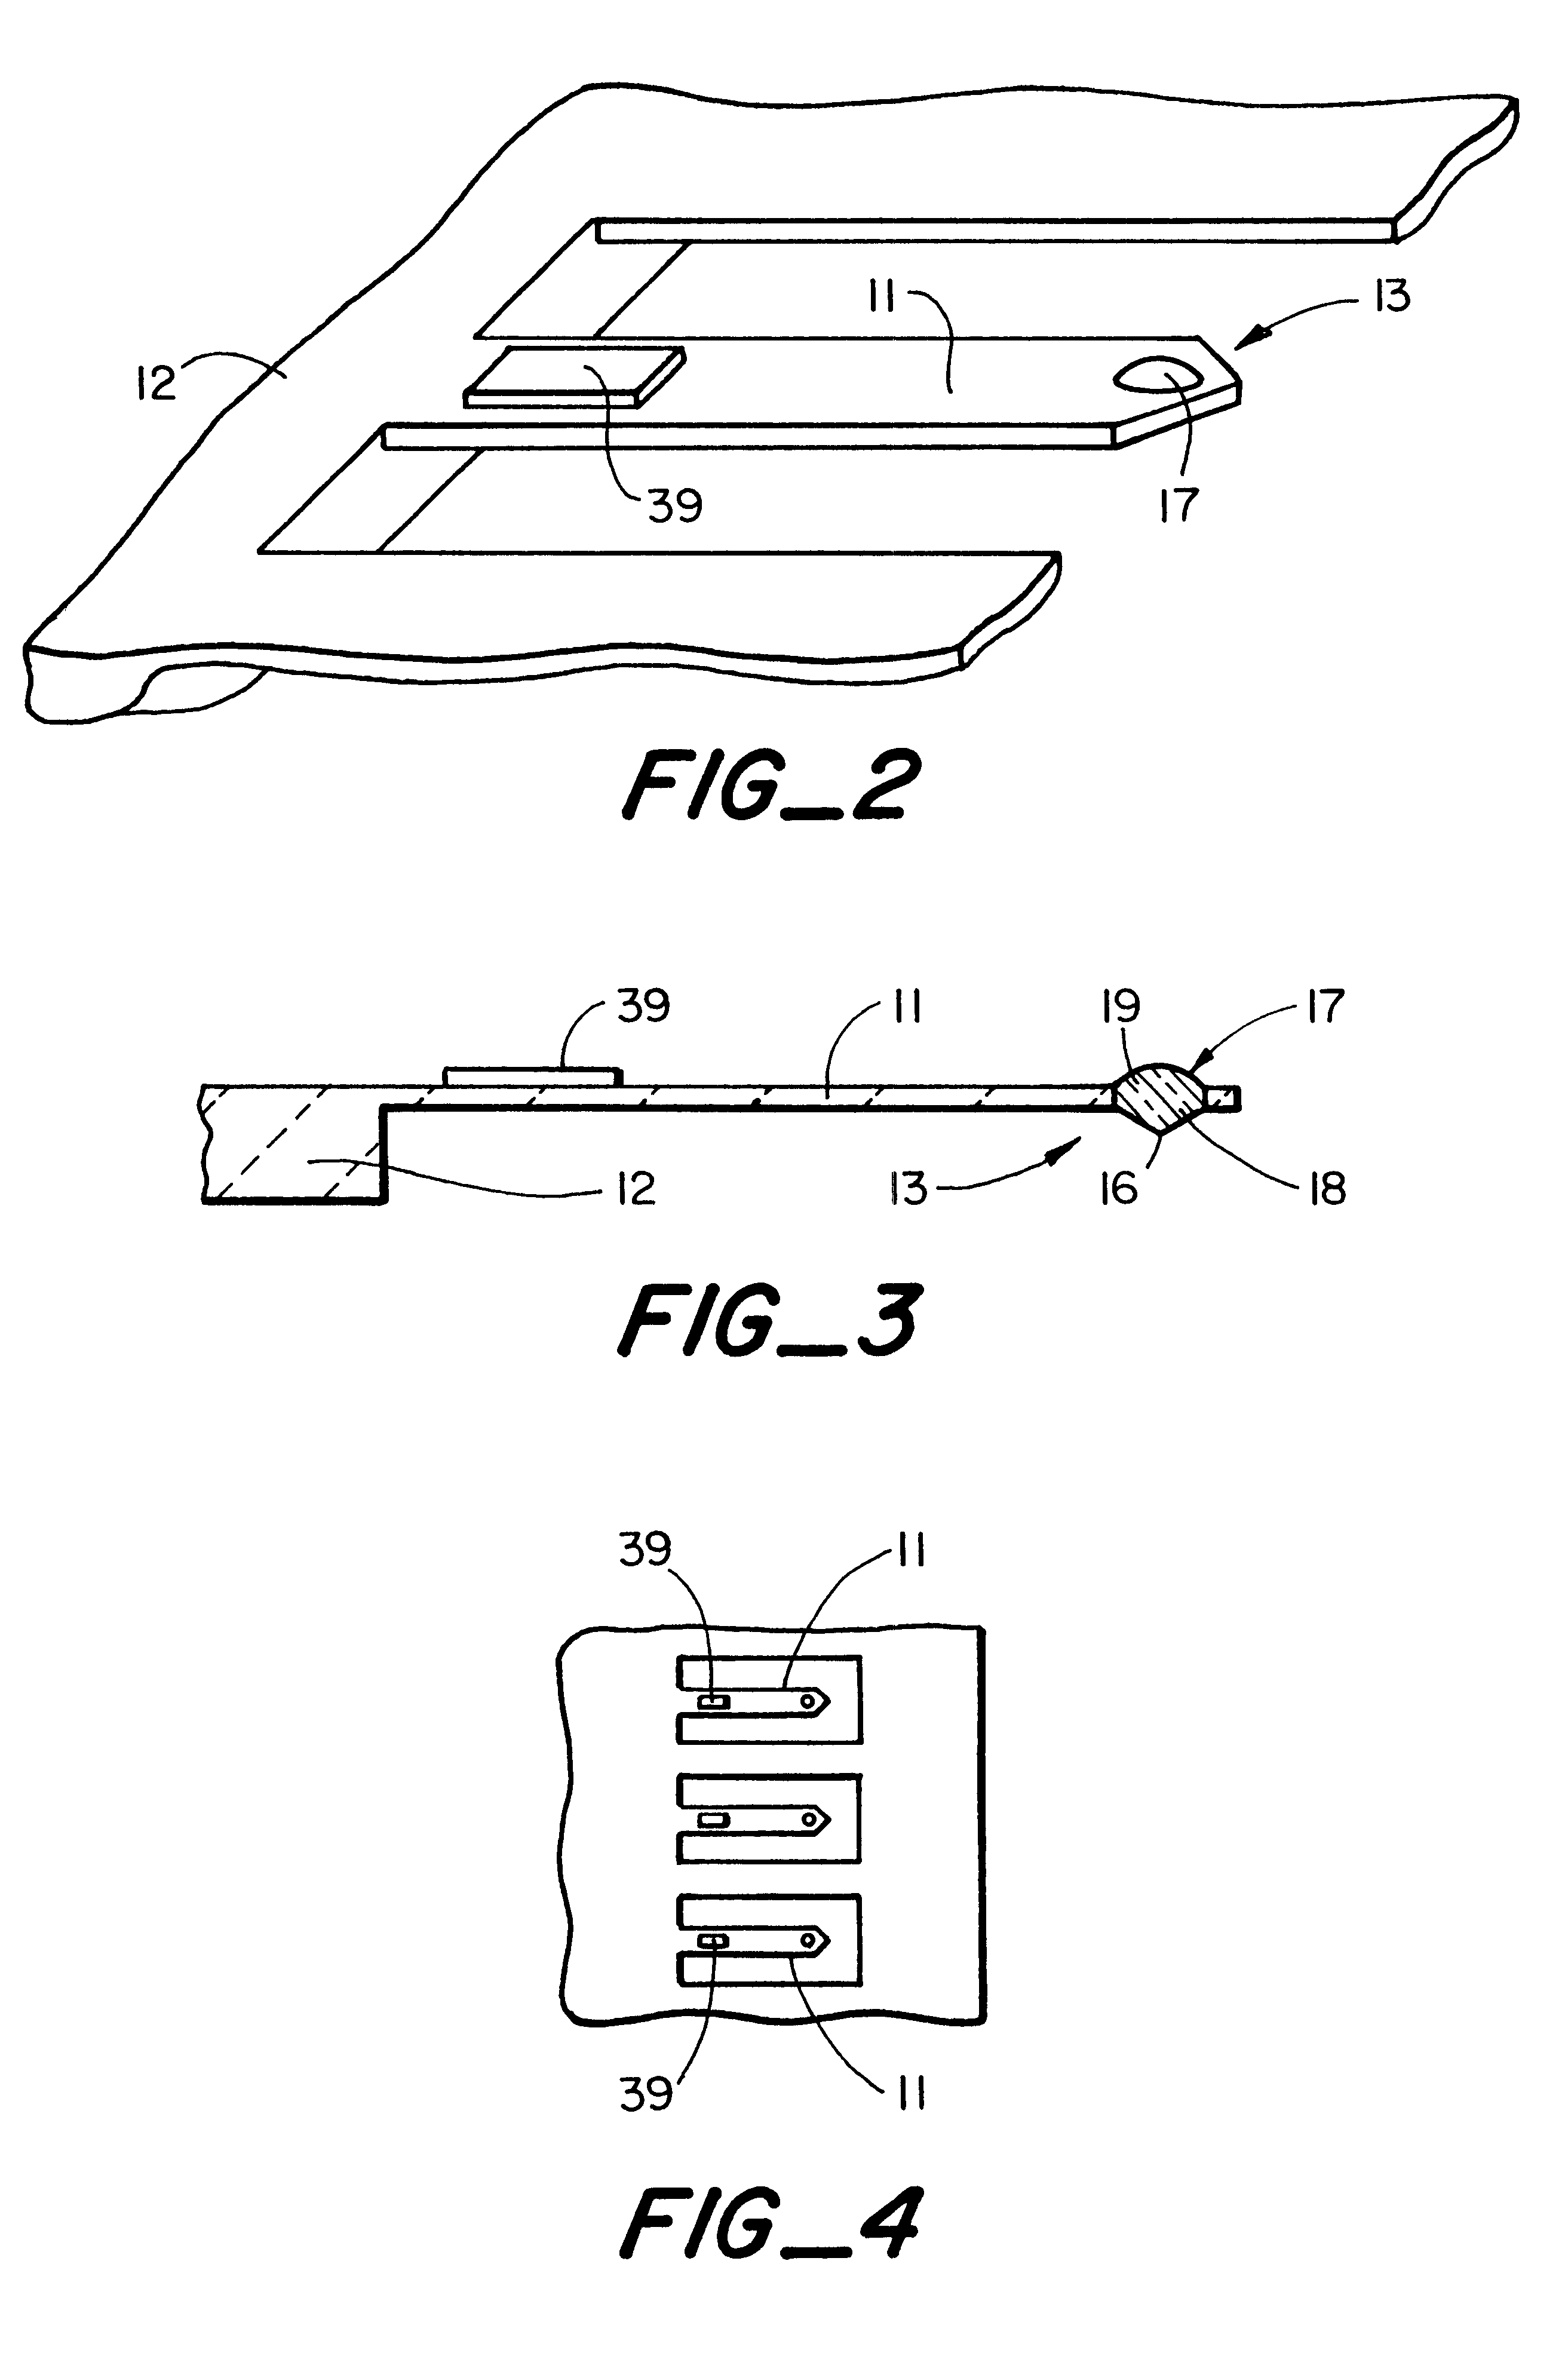 Near field optical scanning system employing microfabricated solid immersion lens